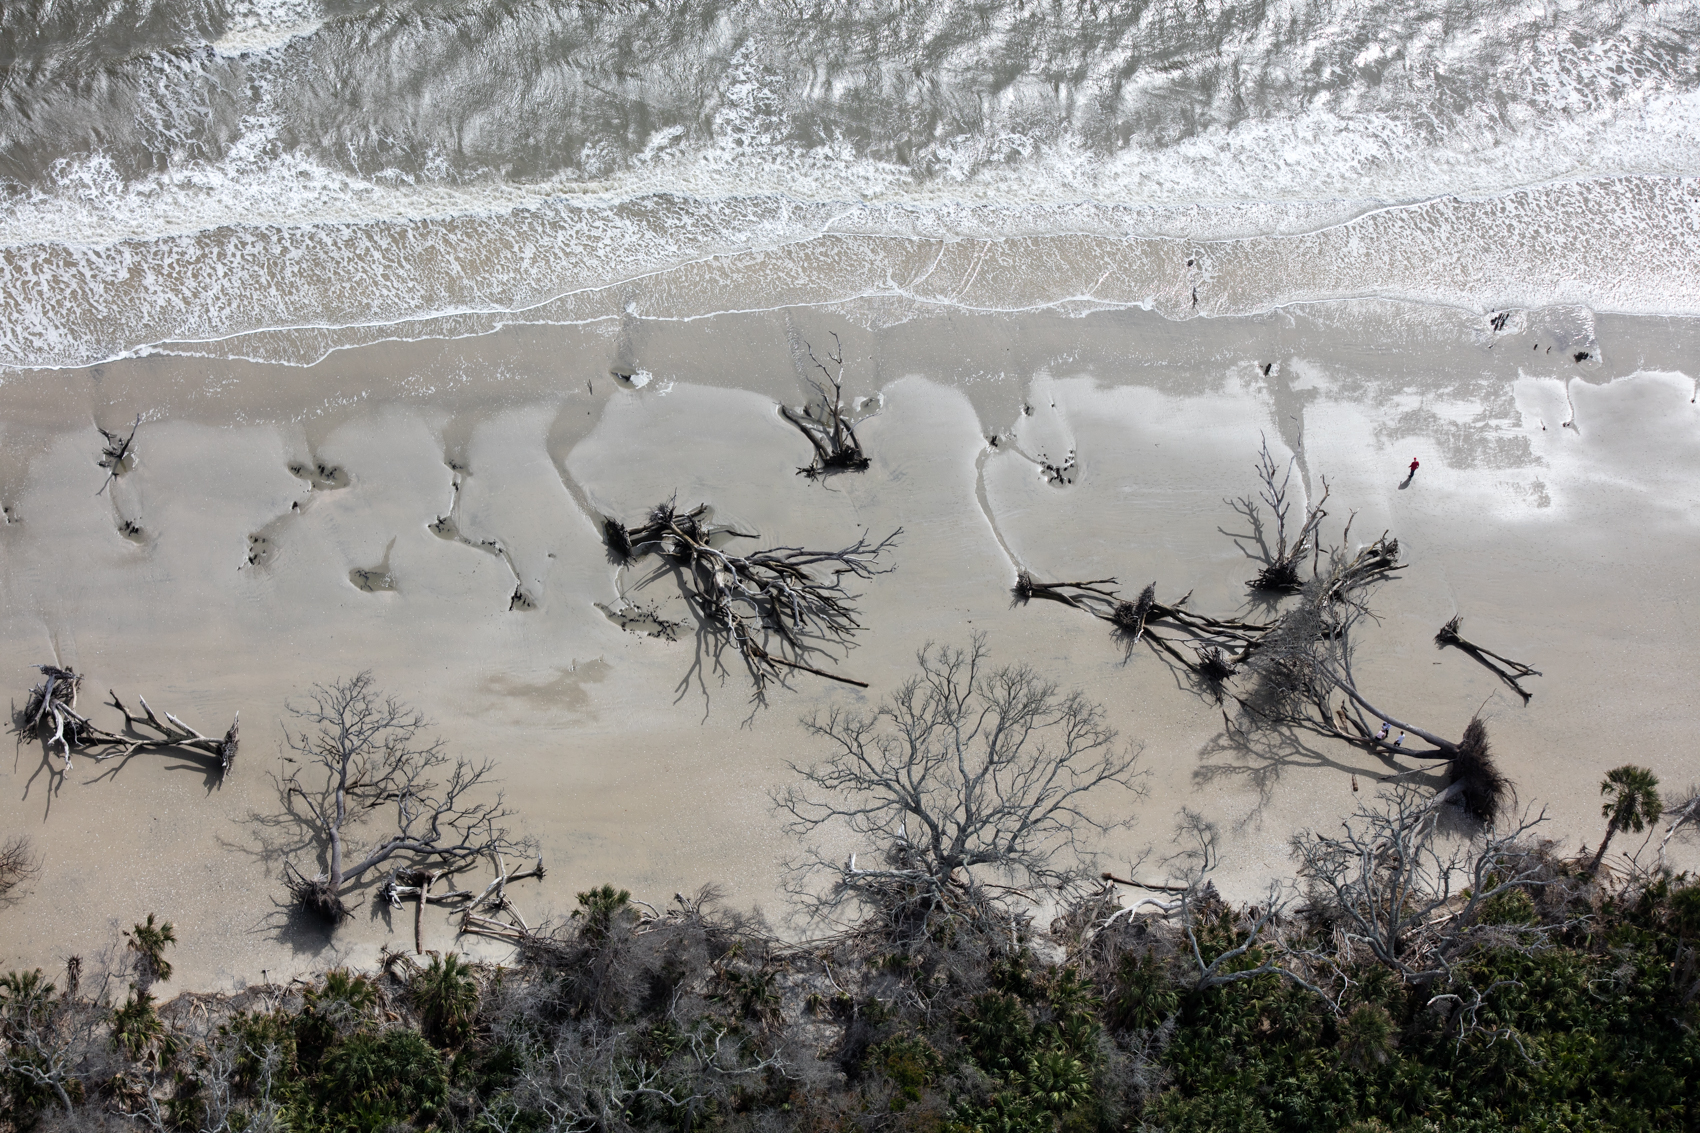 Erosion and saltwater intrusion into this maritime forest on Edisto Island, South Carolina have created a “boneyard” of trees that have toppled into the surf and bleached in the sun and salt.